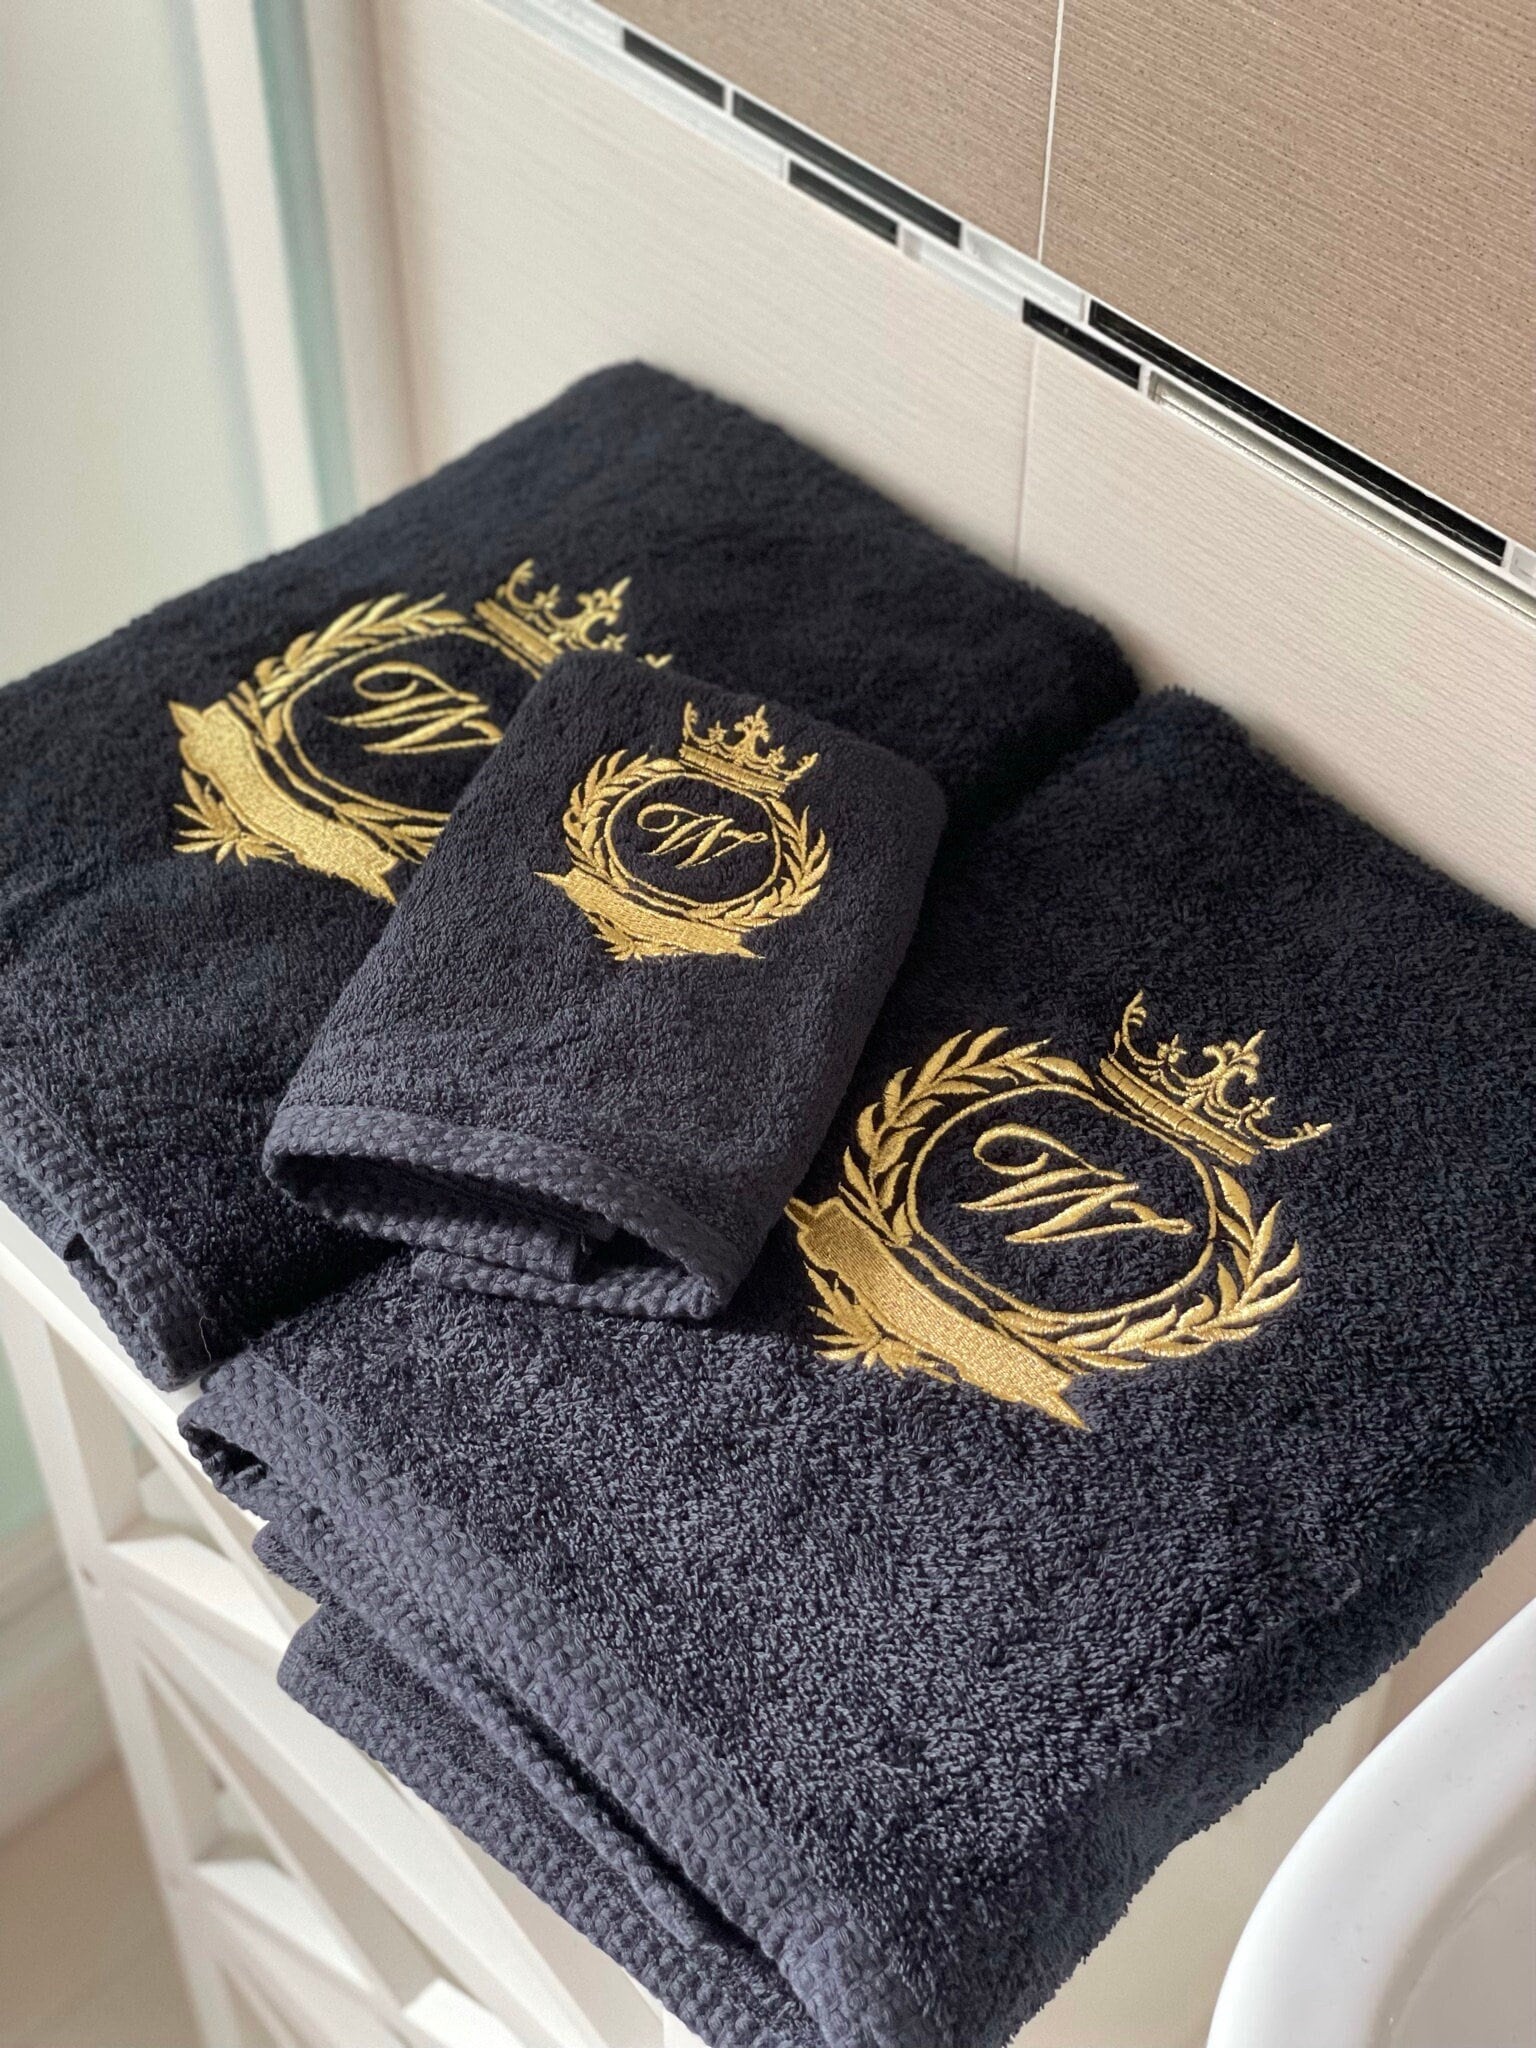 Black Bathroom Towel Set, Gold Antique Crown Custom Embroidery, Monogram Hand  Towels, Personalise, Personalize 